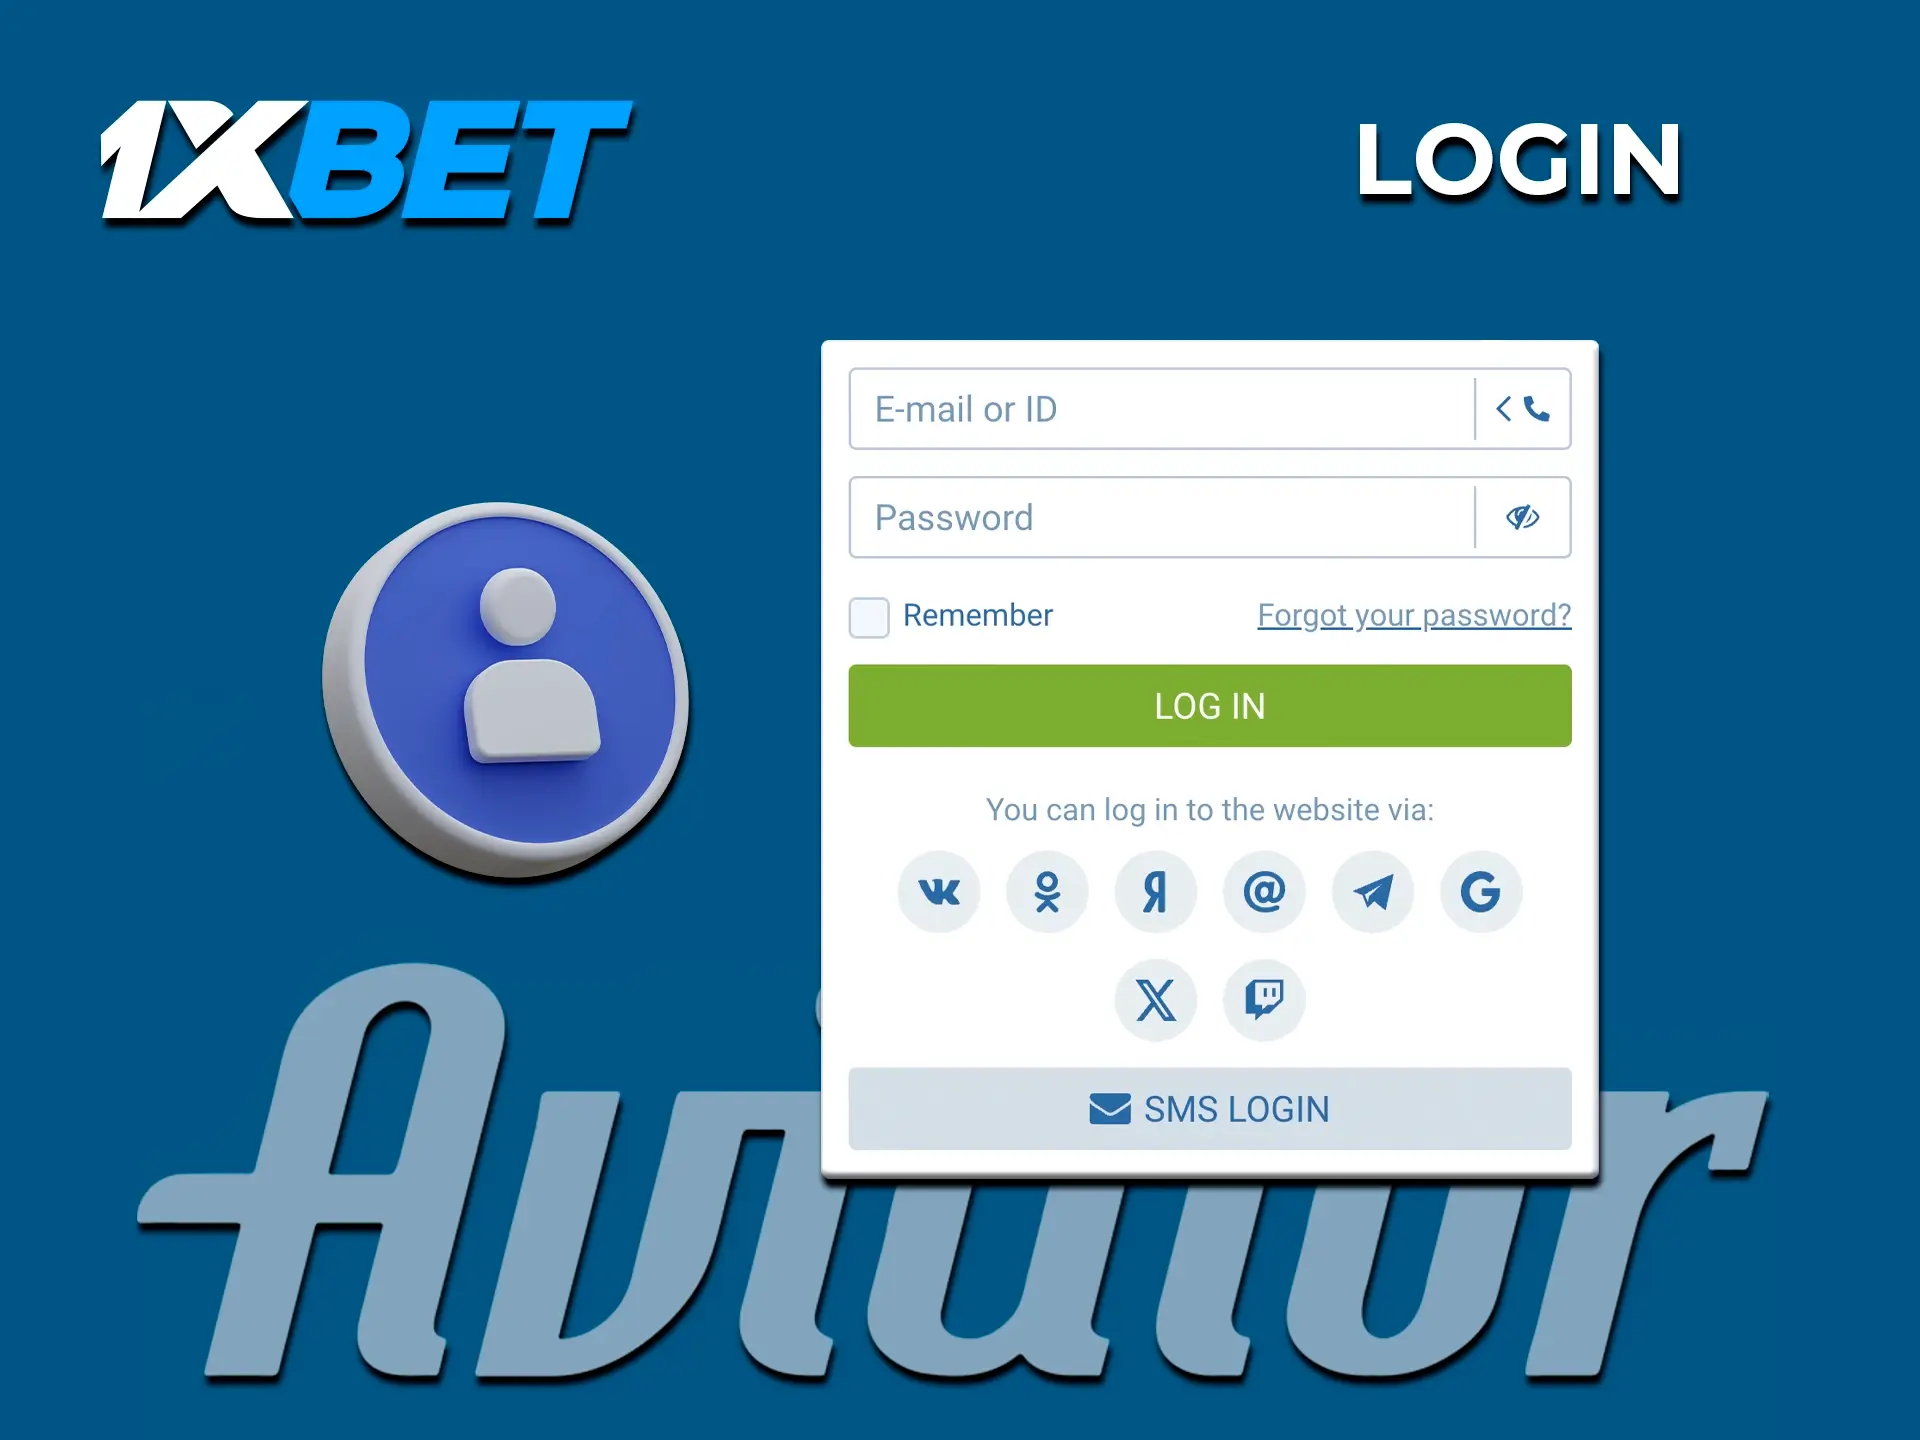 Log in to your account and start winning and getting unforgettable emotions from playing Aviator from 1xBet.